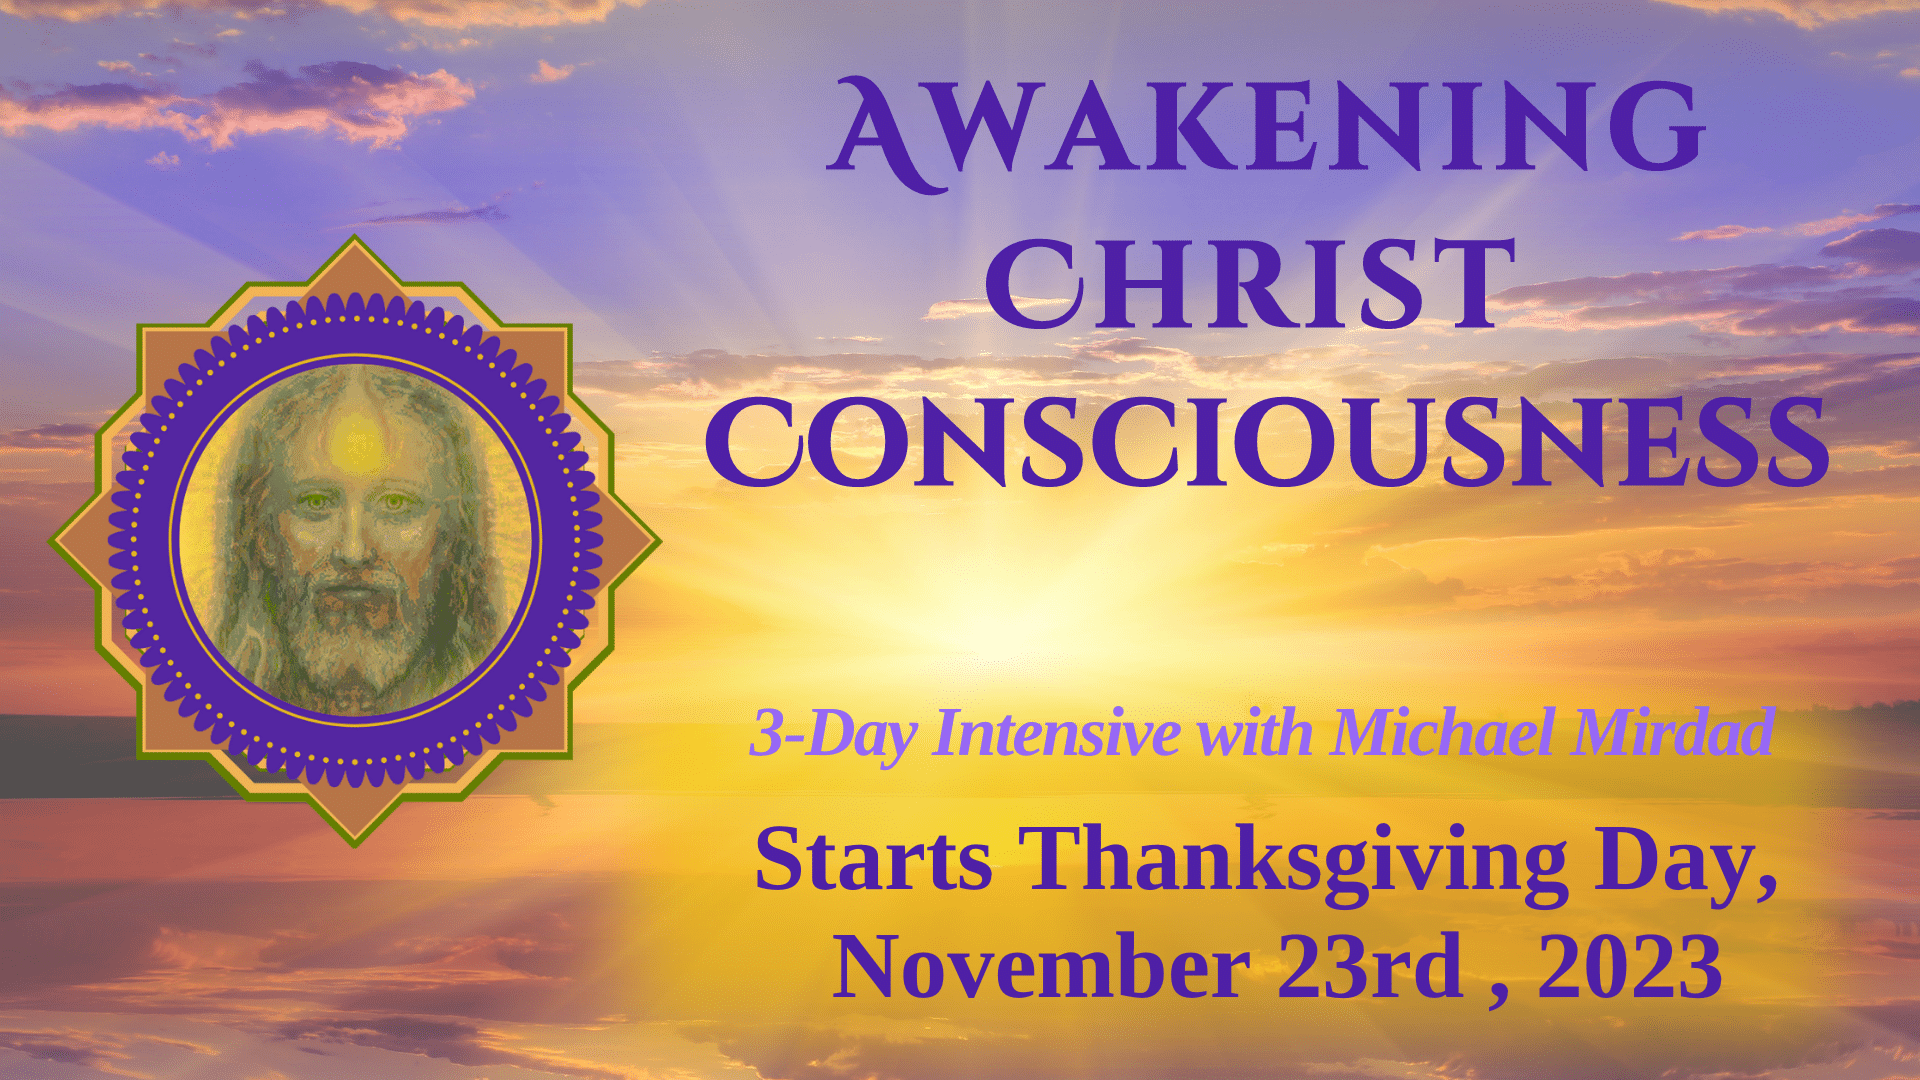 Awakening Christ consciousness and experiencing spiritual growth begins on Thanksgiving Day.